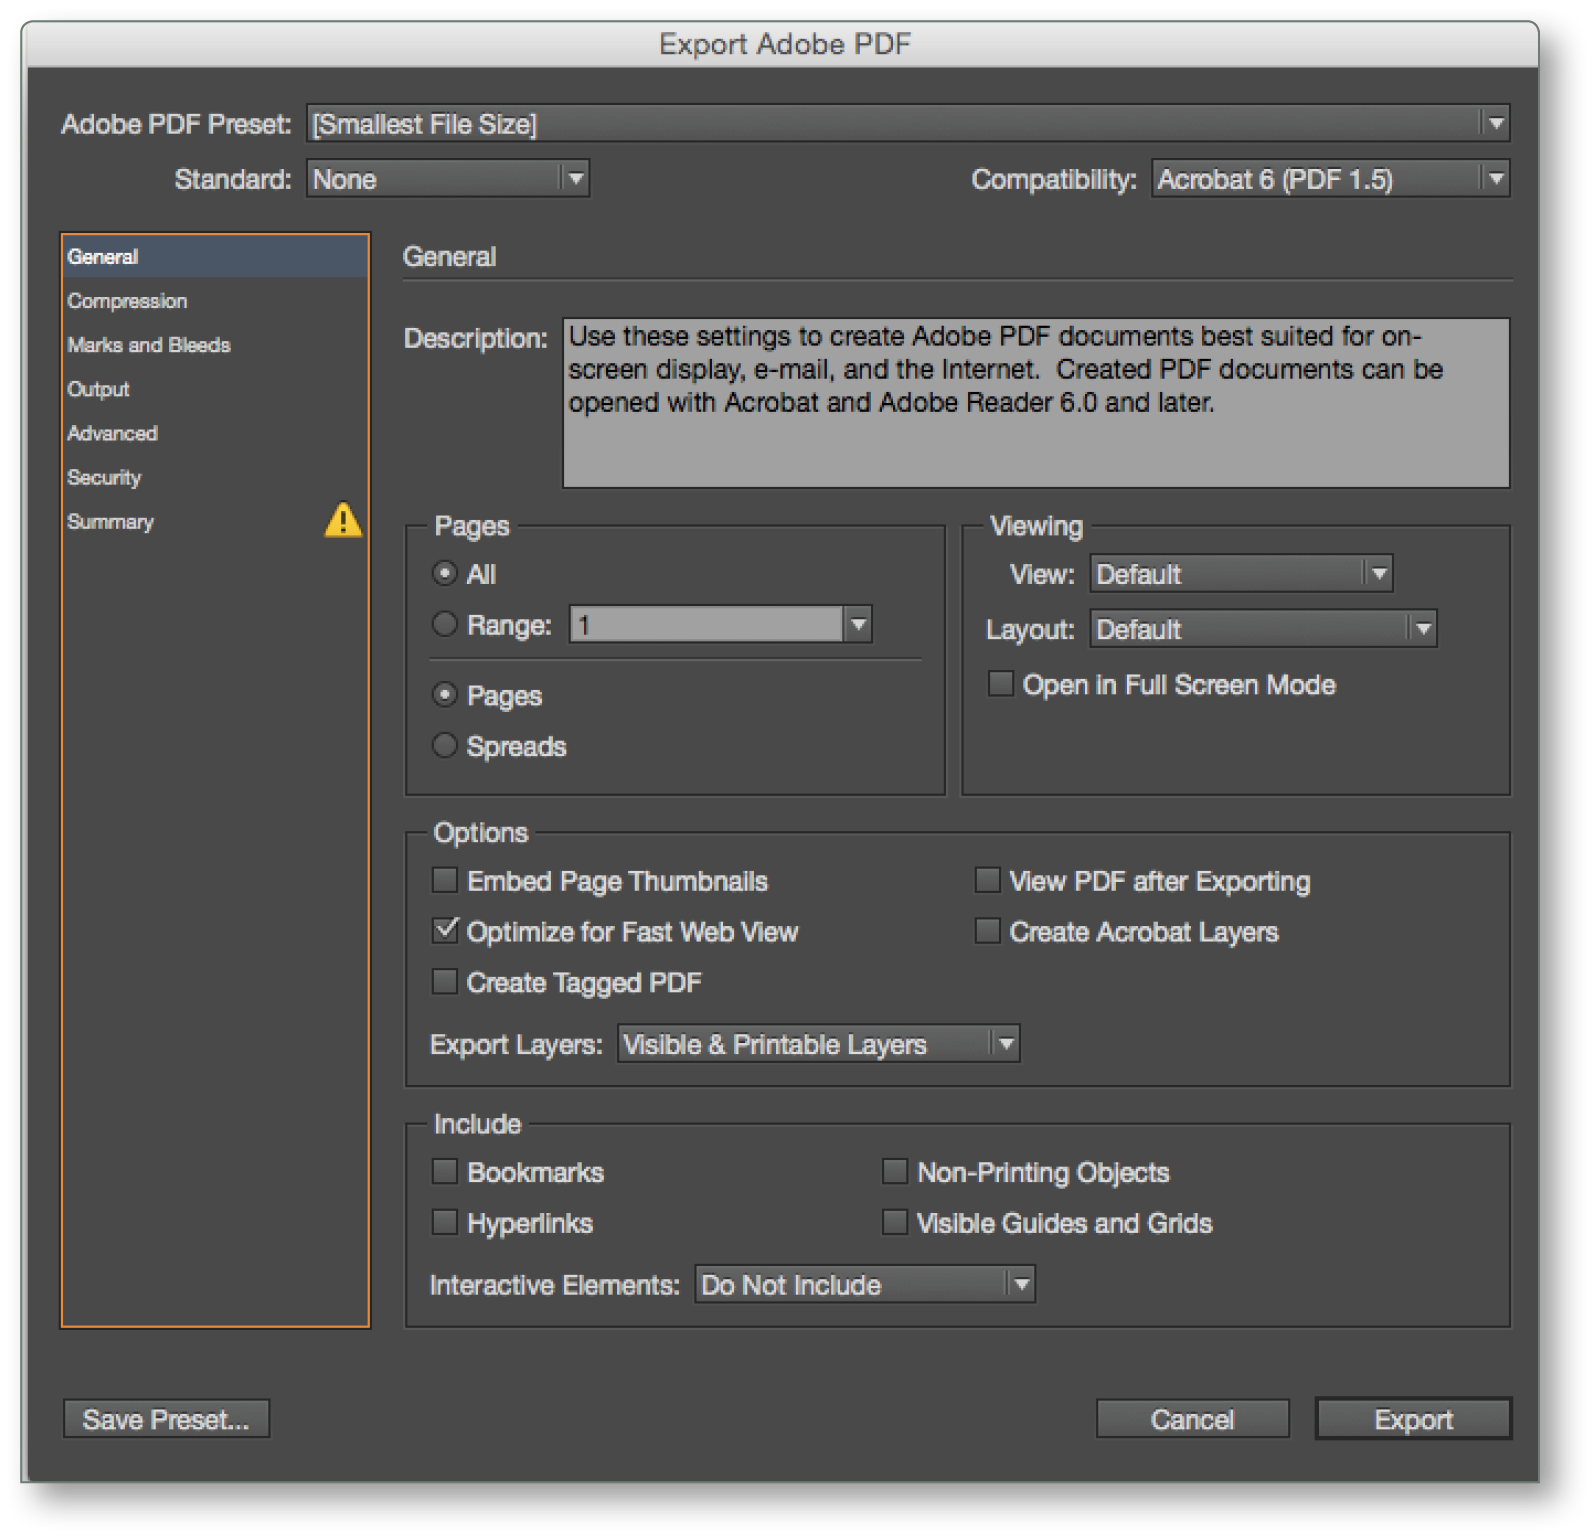 Indesign Cc Tip Pdf Export View Options Technology For Publishing Llc